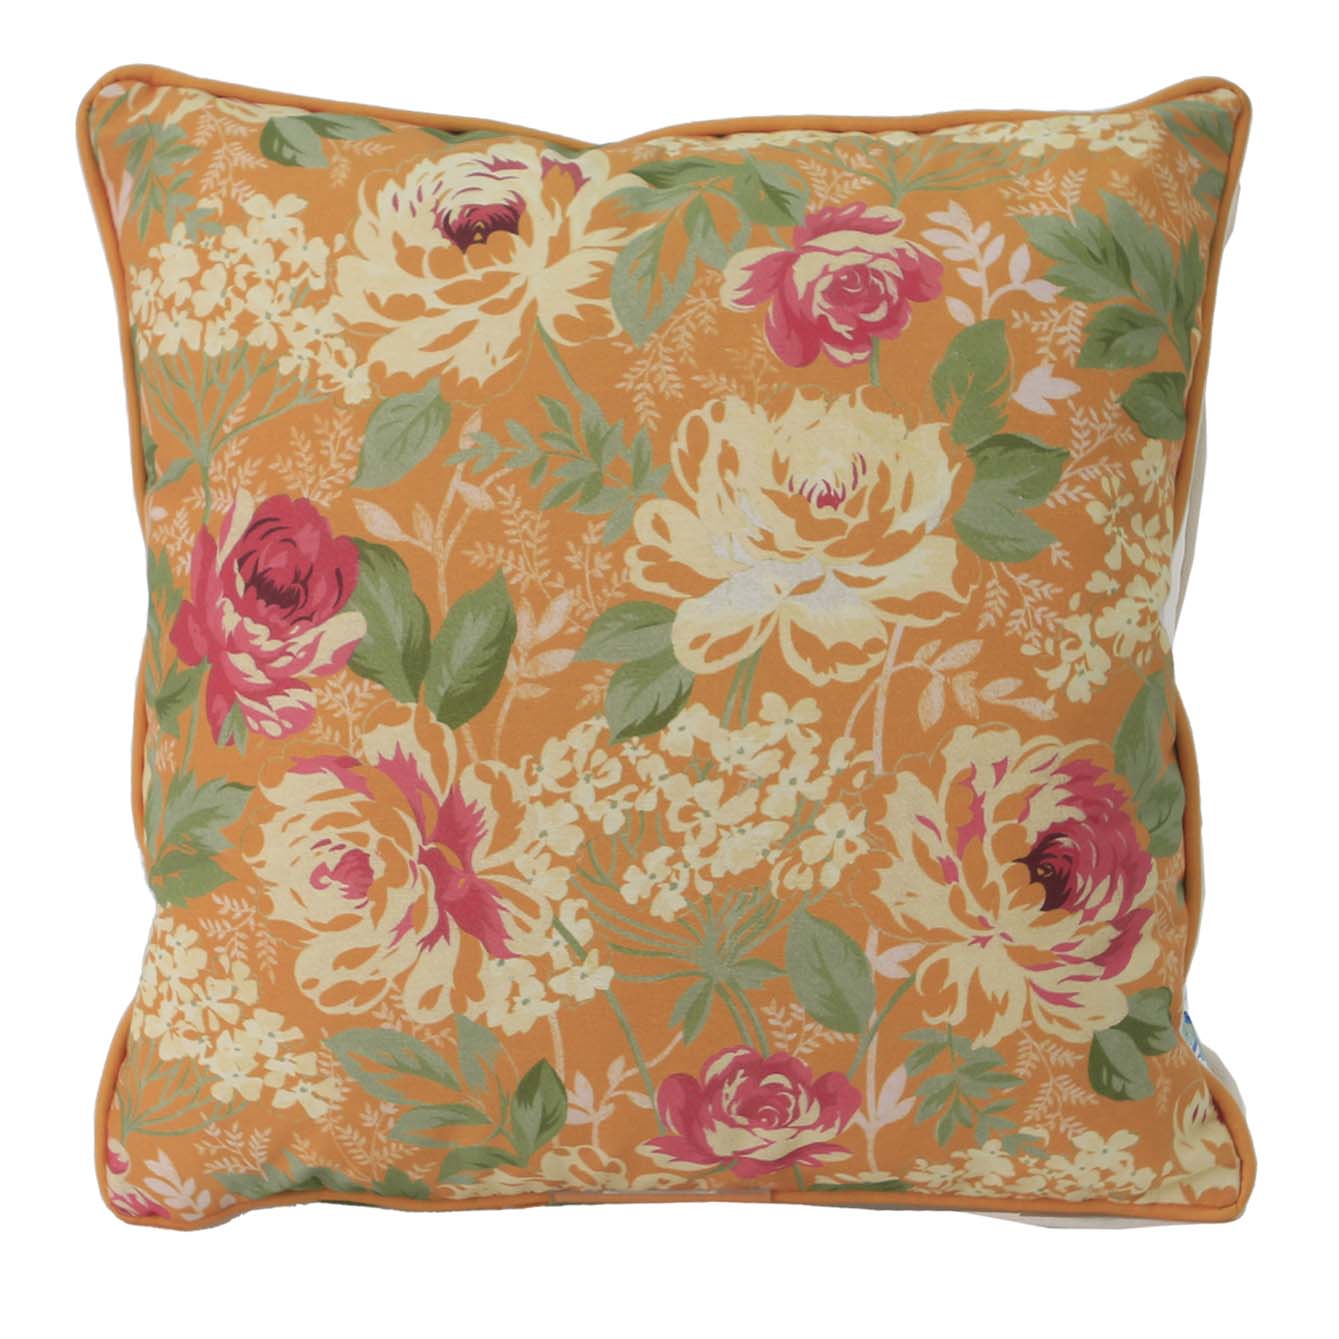 Alys Ochre Outdoor Scatter Cushion by Laura Ashley